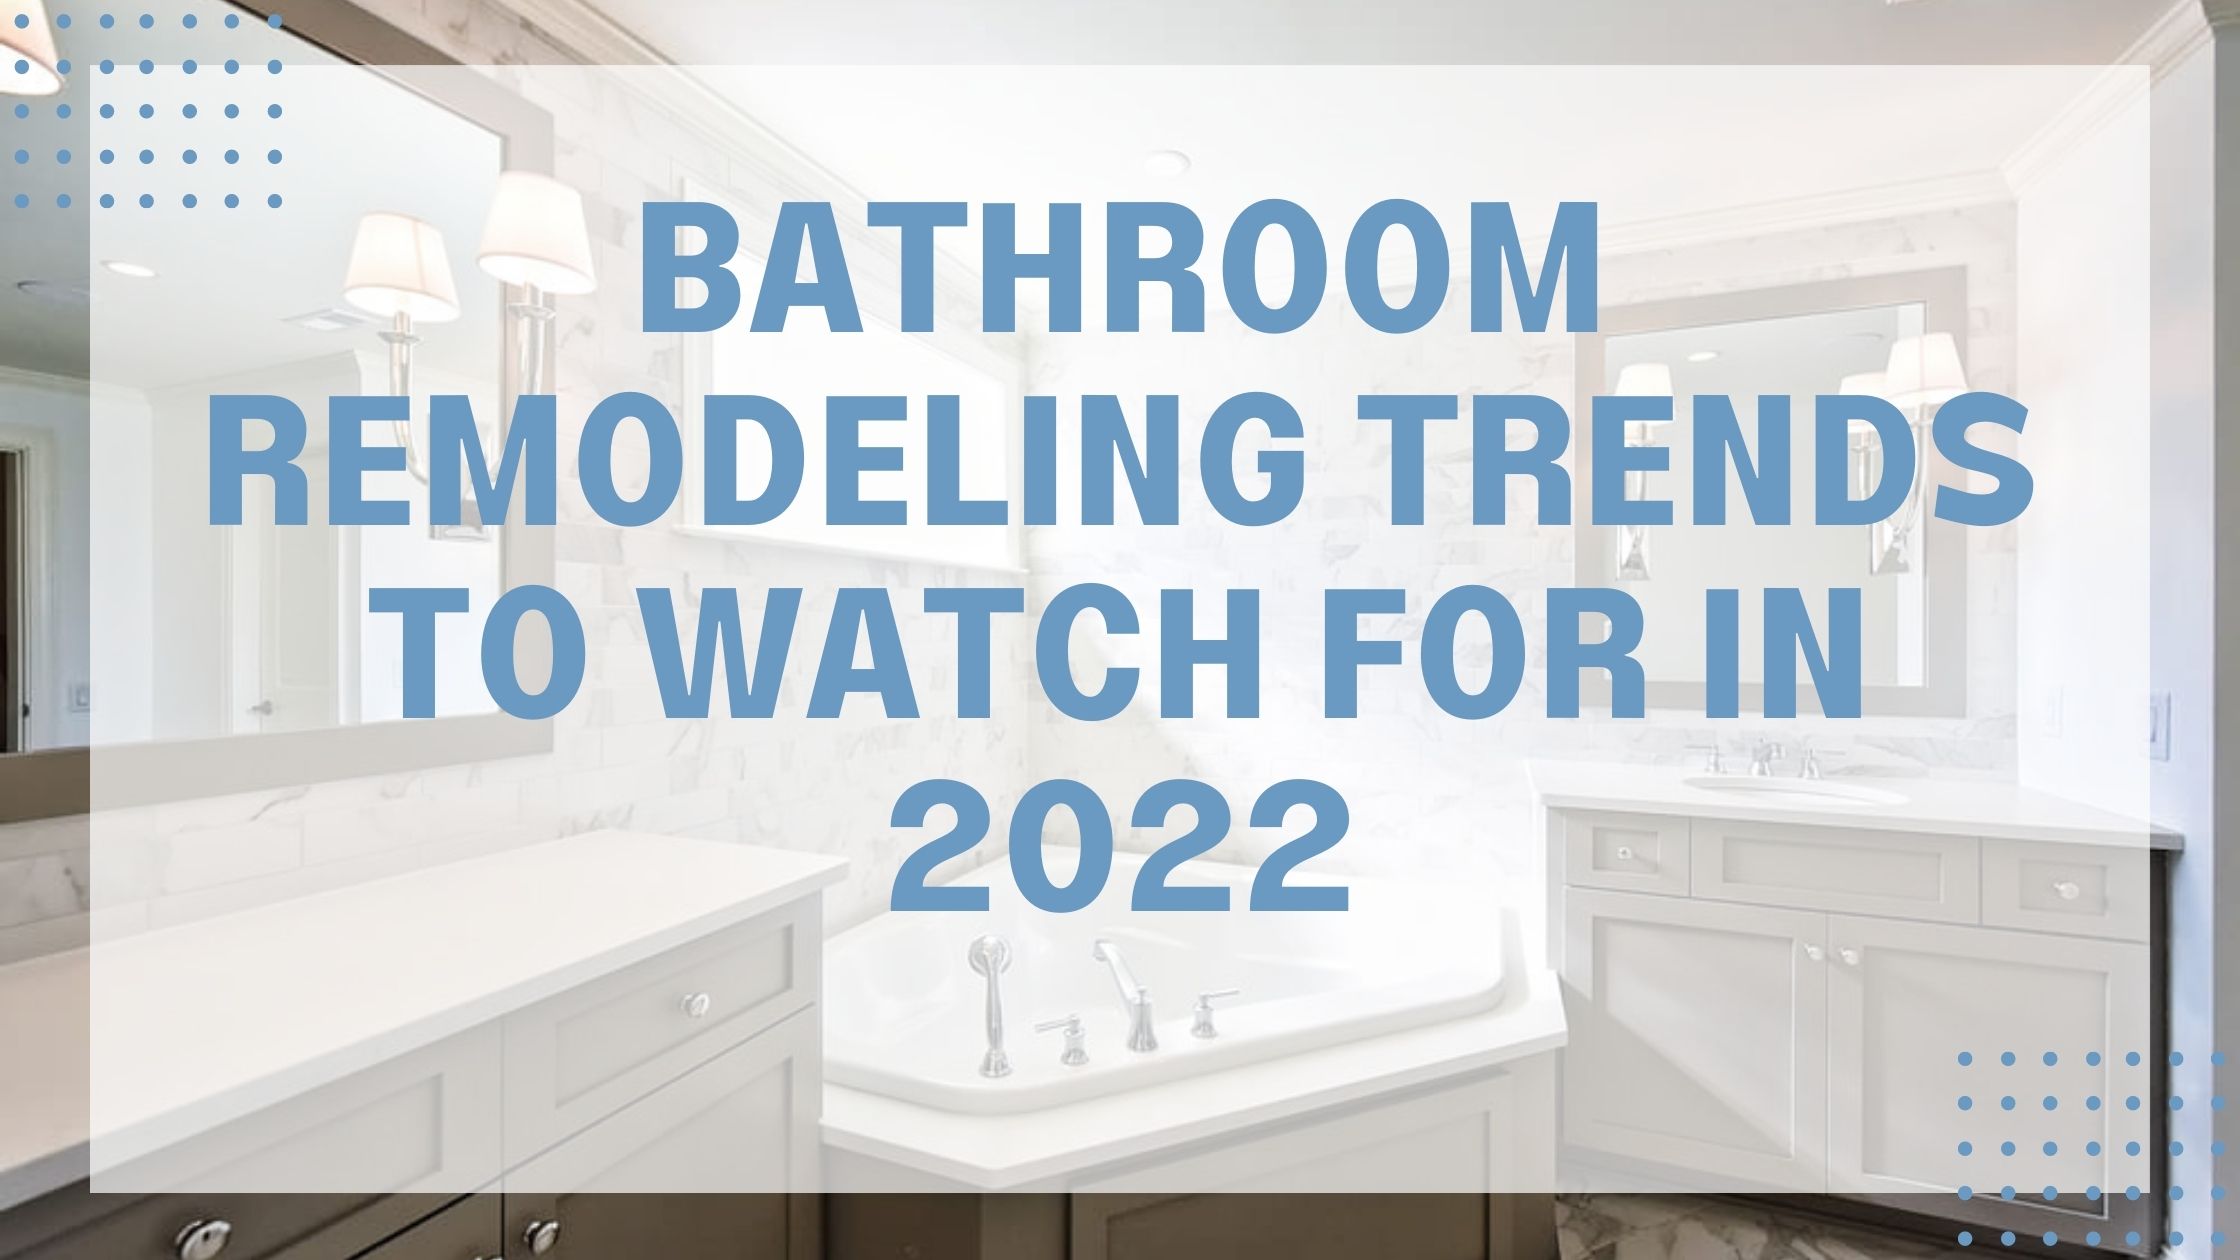 Bathroom Remodeling Trends to Watch for in 2022